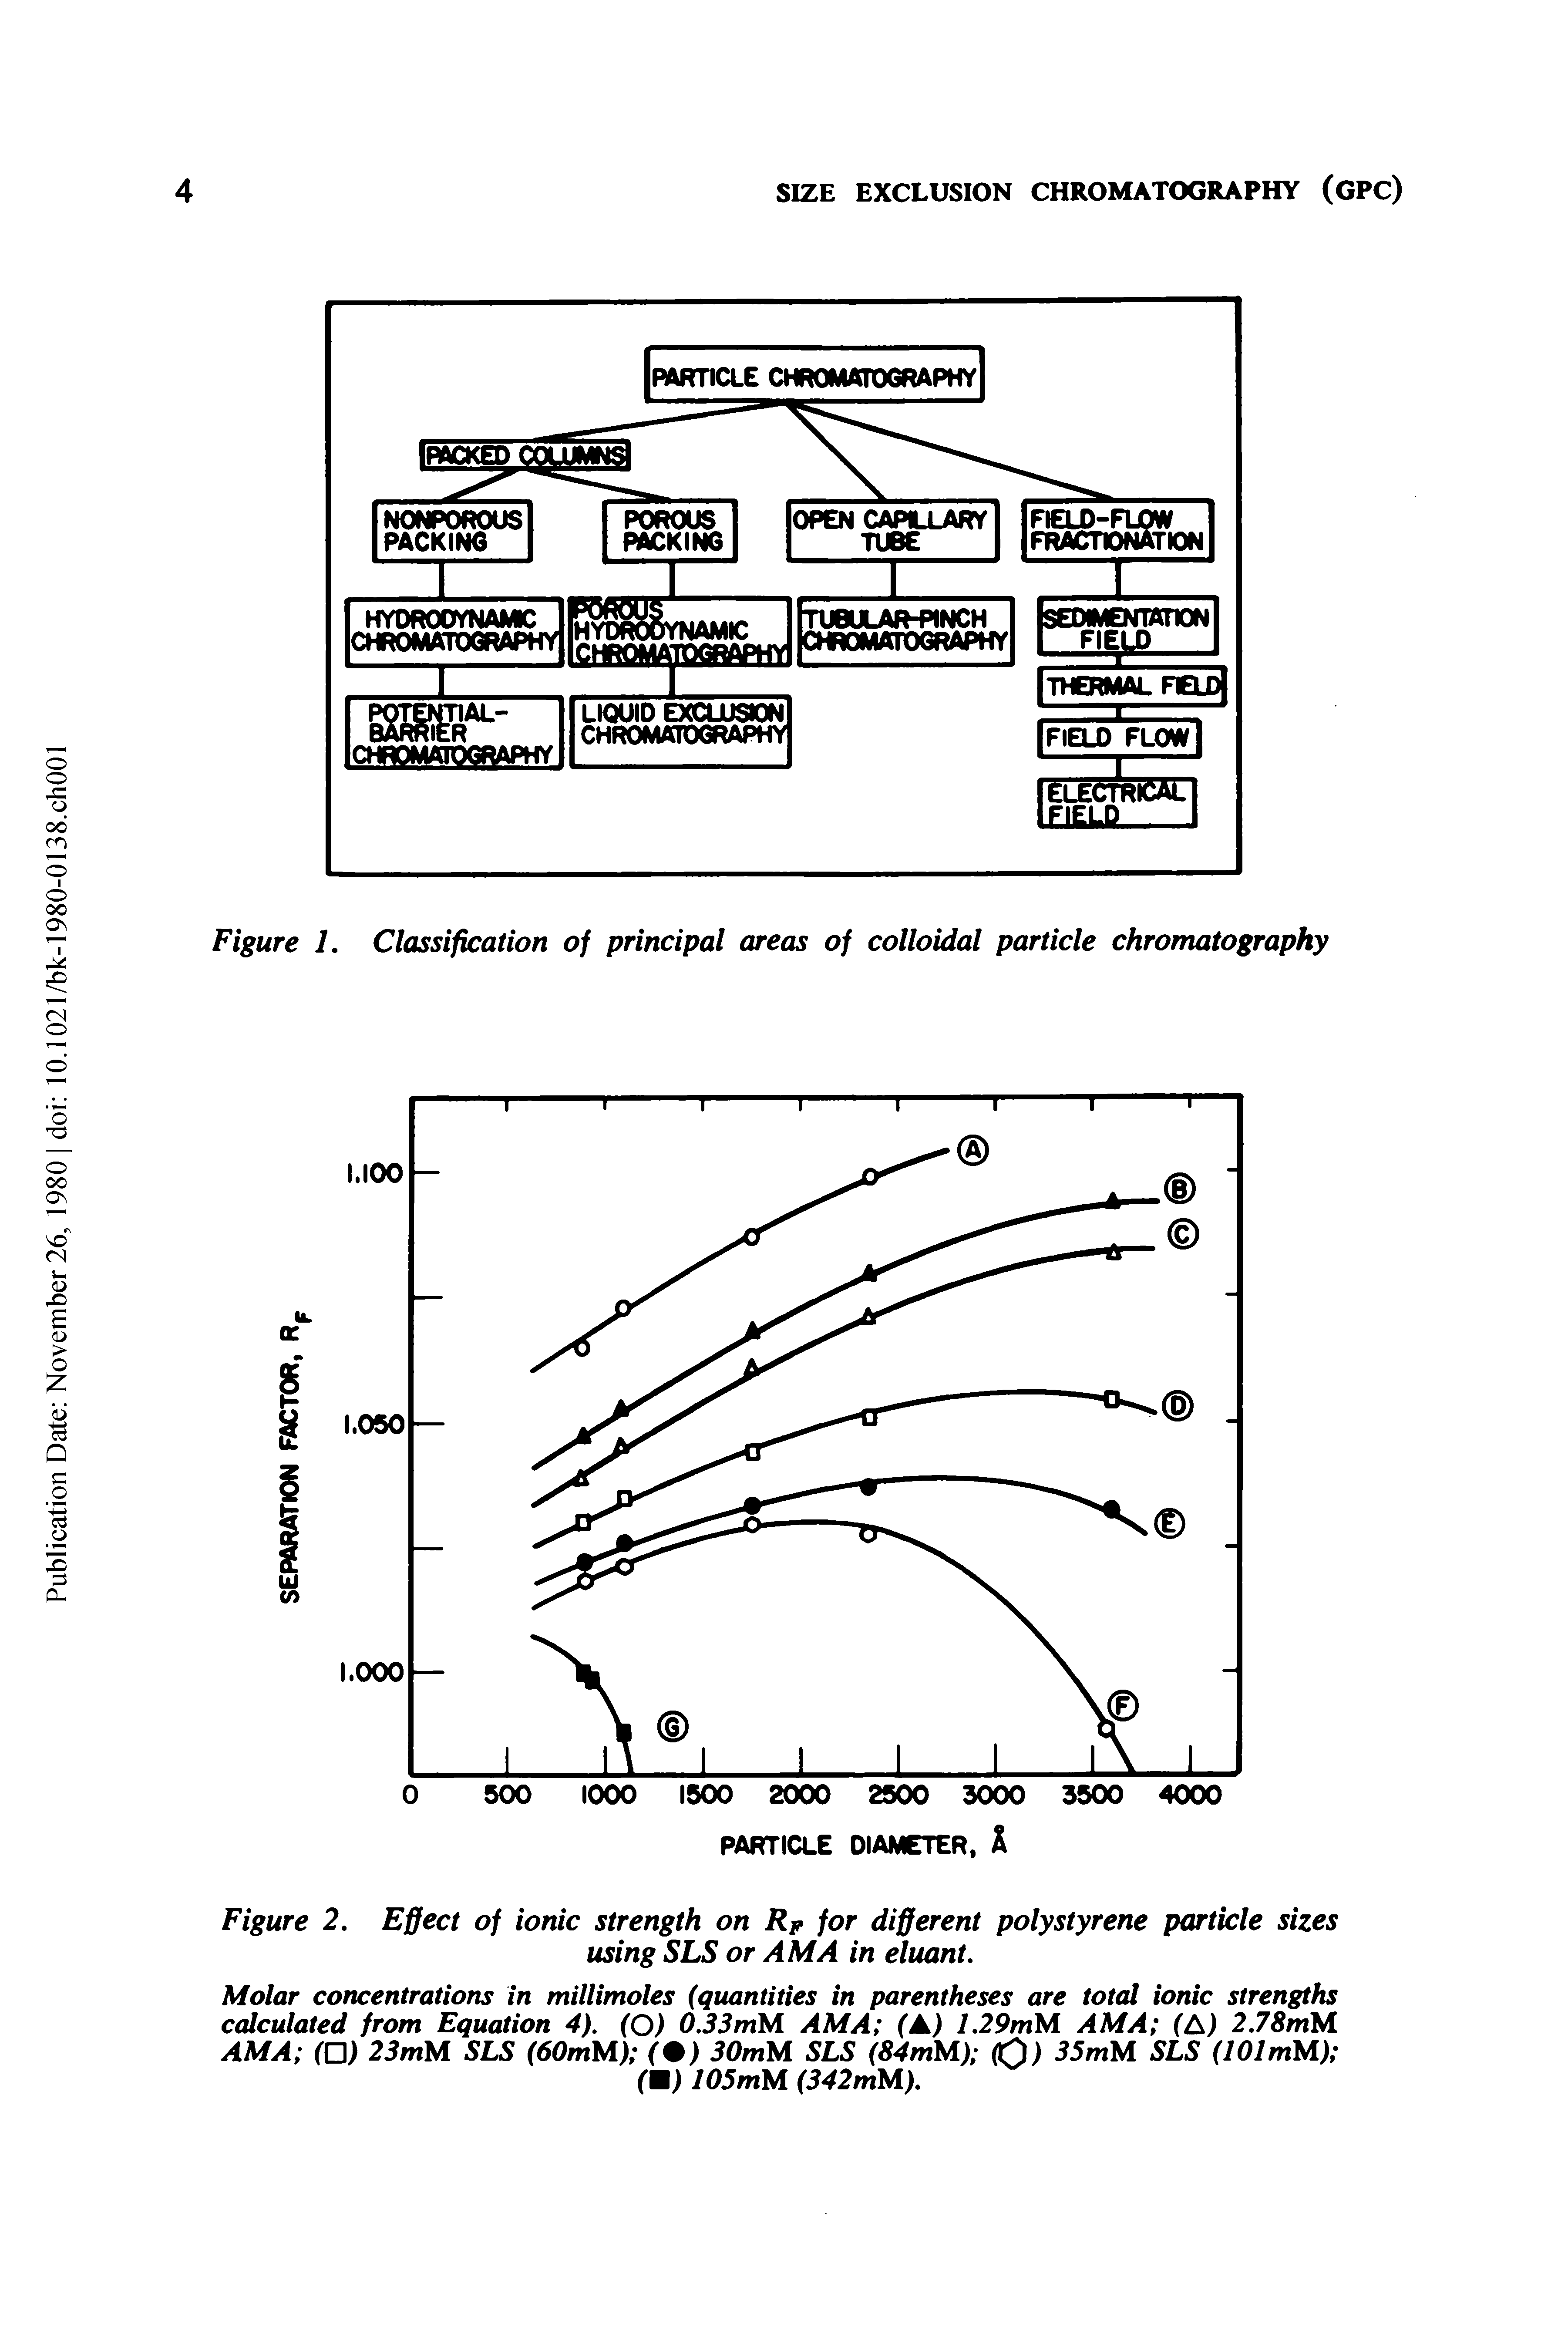 Figure 2. Effect of ionic strength on Rp for different polystyrene particle sizes using SLS or AM A in eluant.